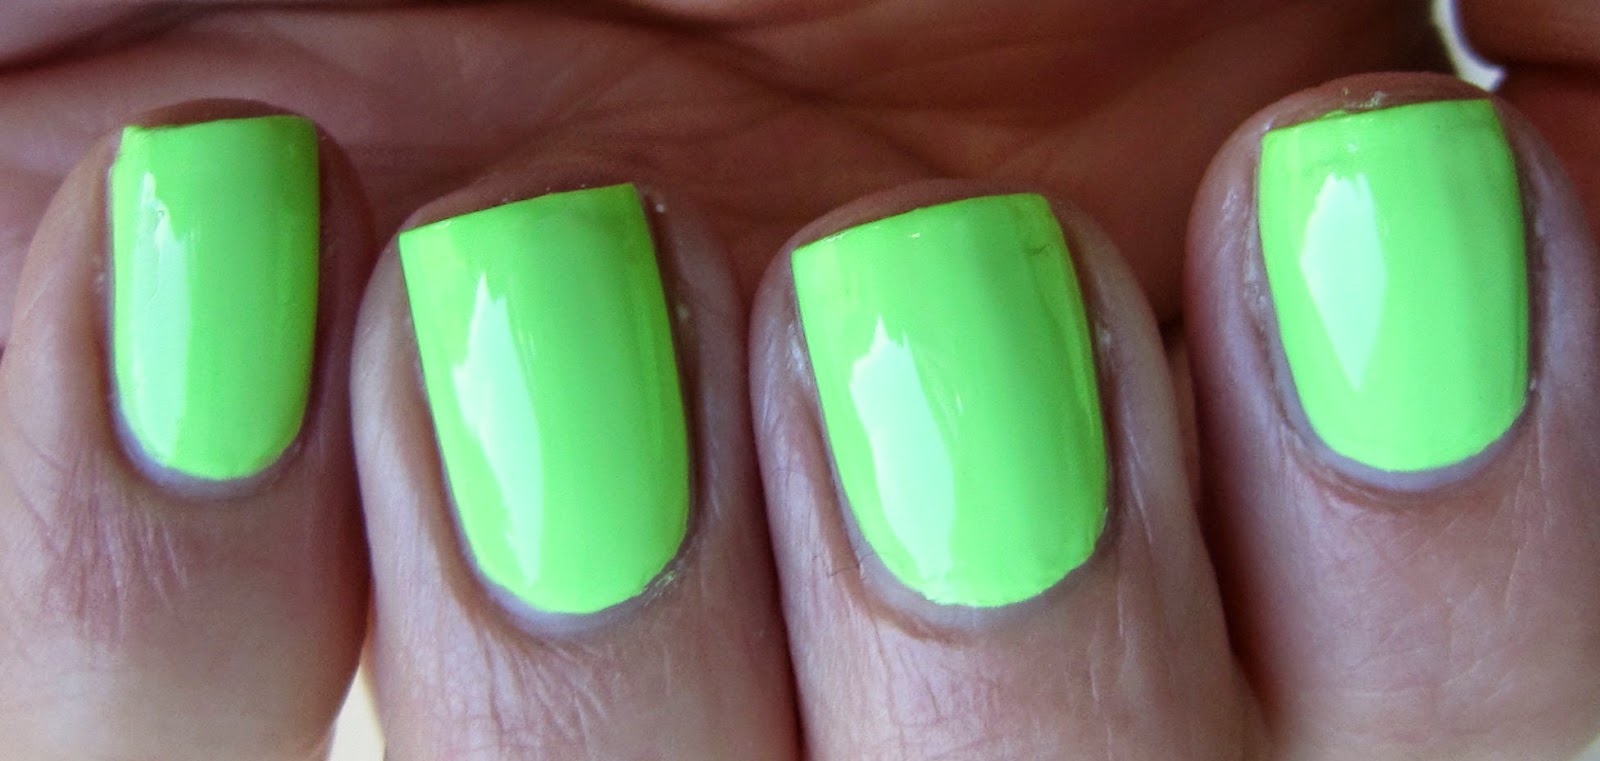 3. "China Glaze Grass is Lime Greener" - wide 4